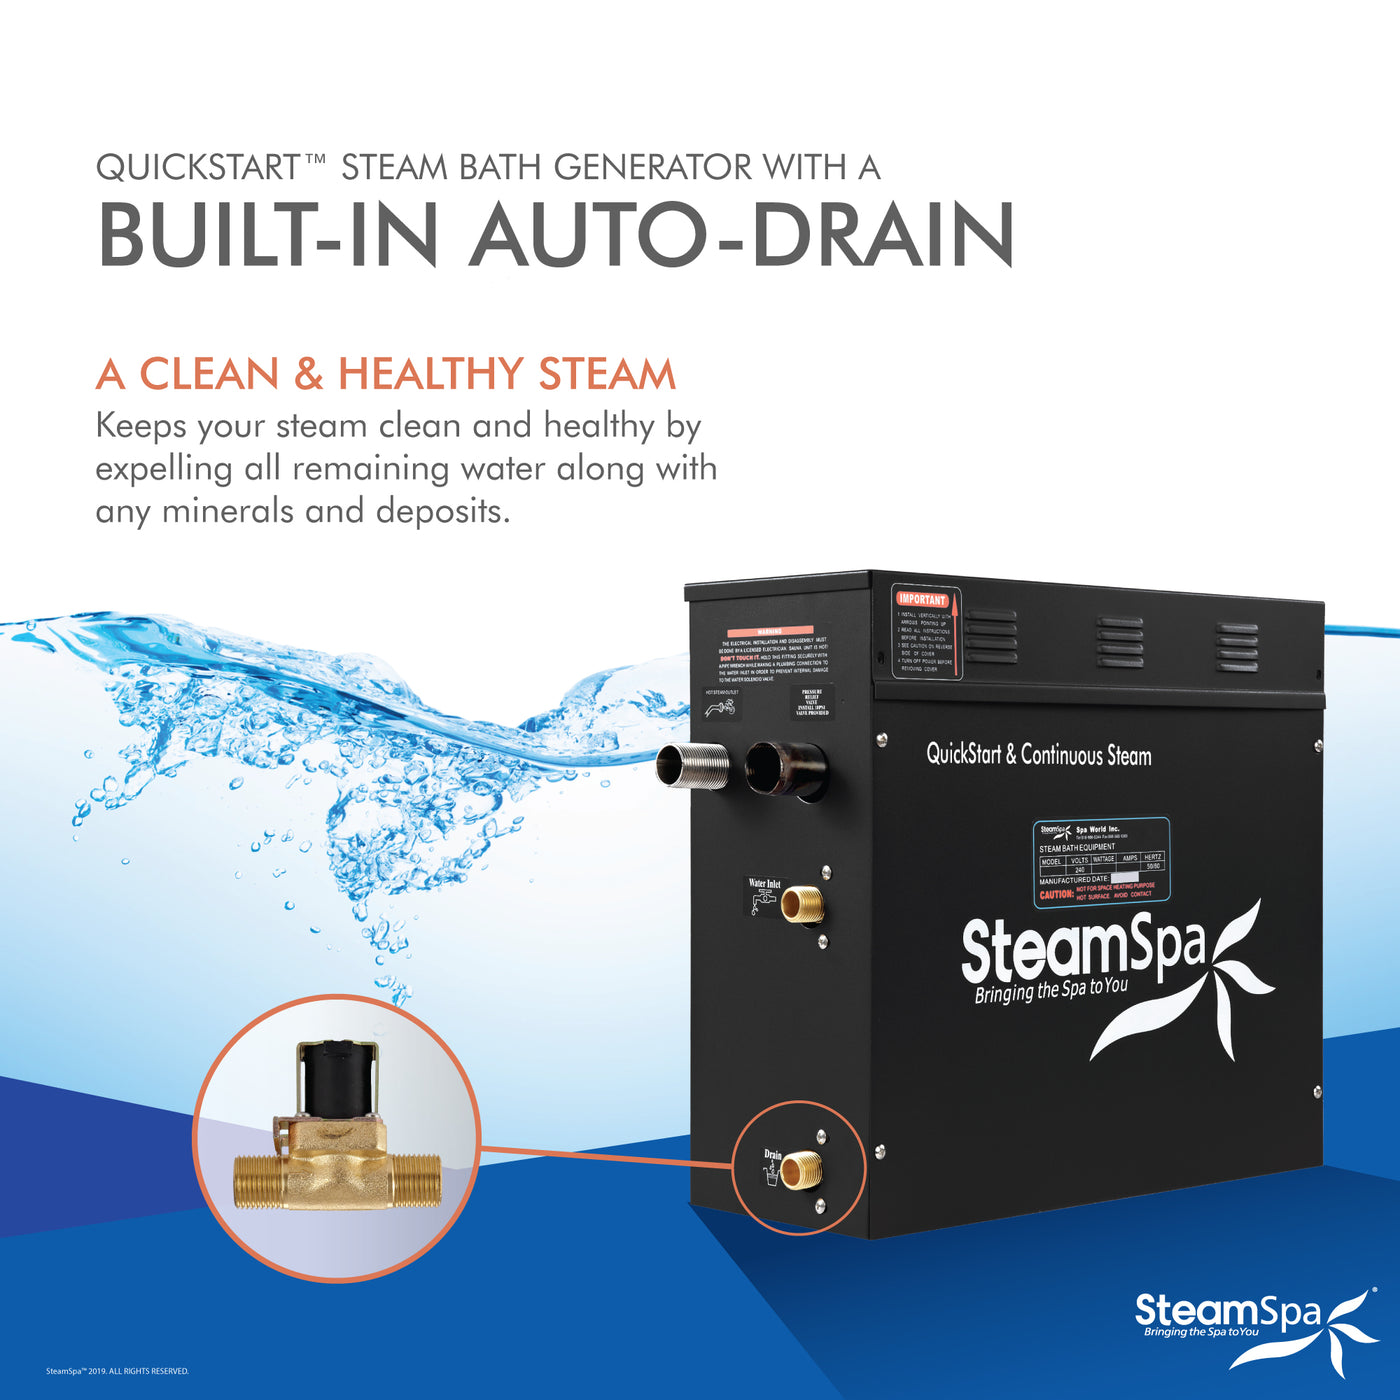 Black Series WiFi and Bluetooth 6kW QuickStart Steam Bath Generator Package with Dual Aroma Pump in Polished Chrome BKT600CH-ADP